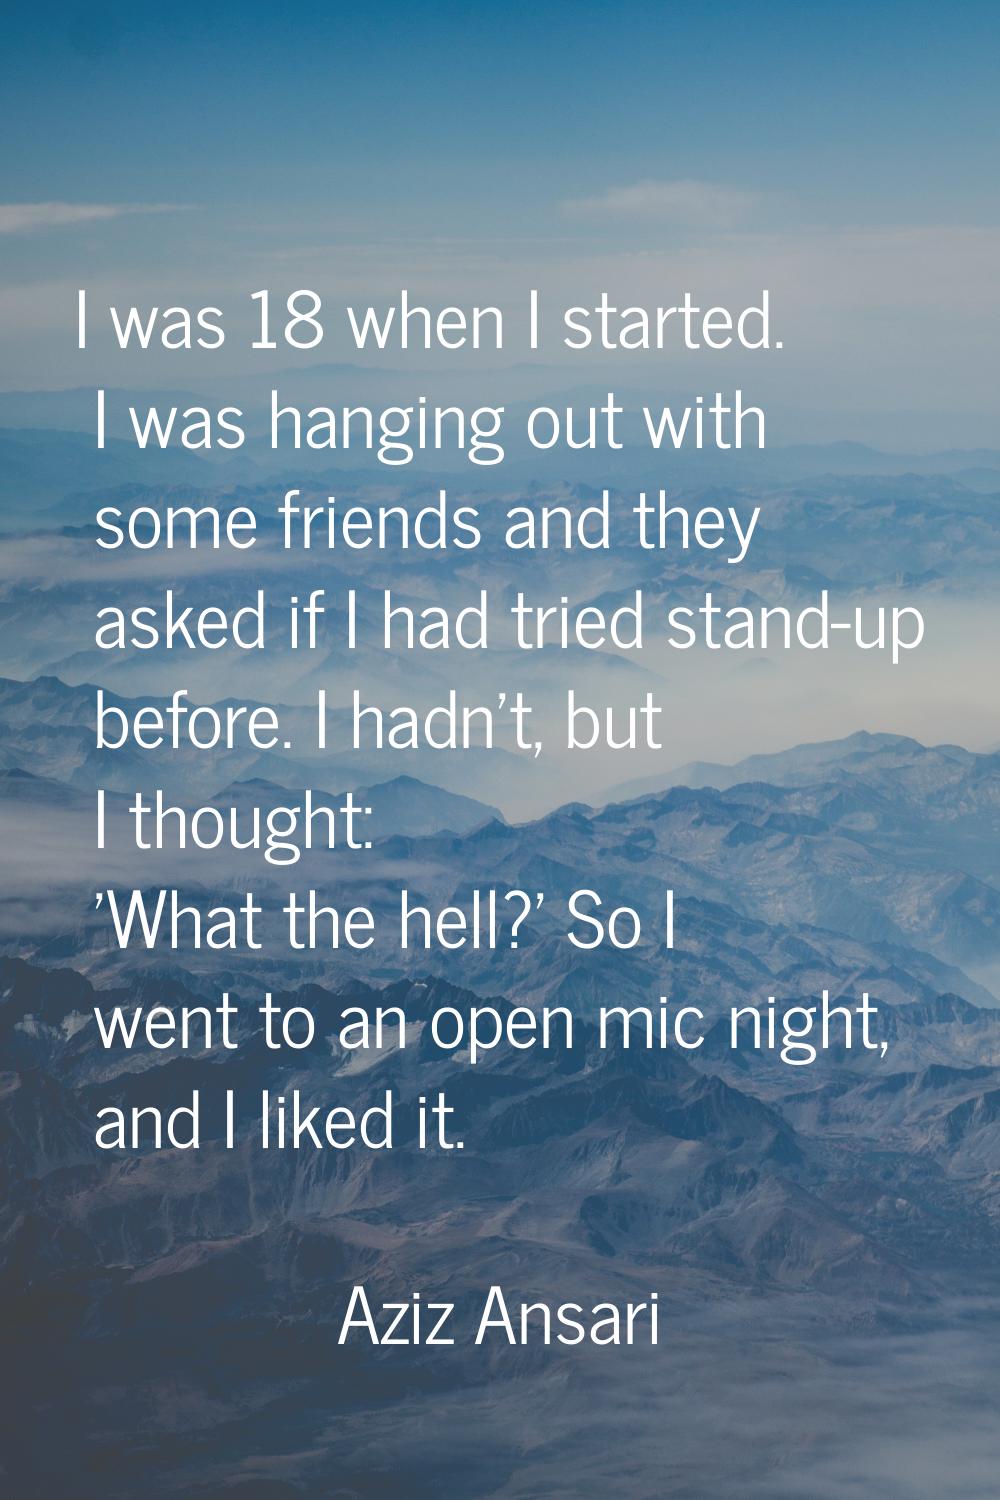 I was 18 when I started. I was hanging out with some friends and they asked if I had tried stand-up